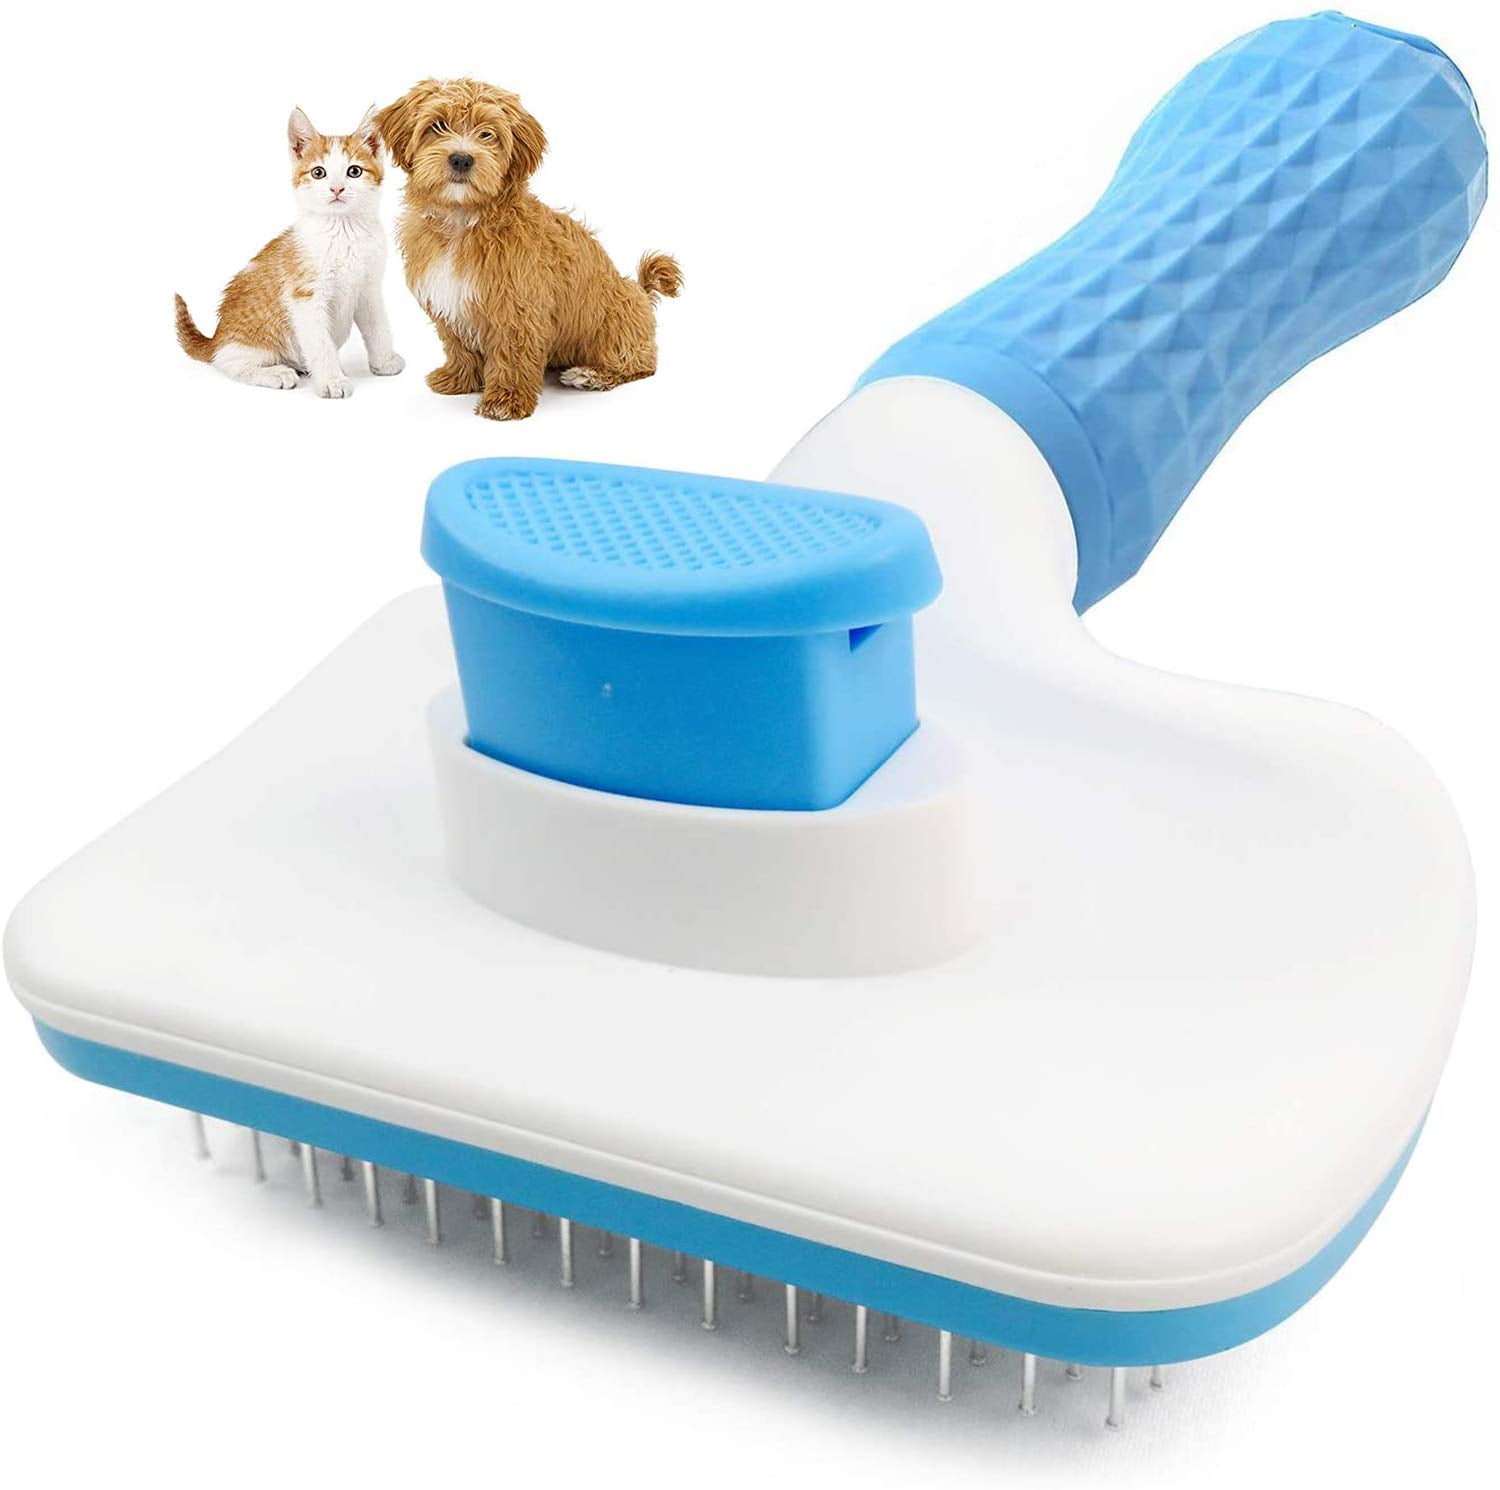 Pet Dogs Cats Hair Grooming Slicker Brush Shedding Soft Bath Hair Cleaning Tool 